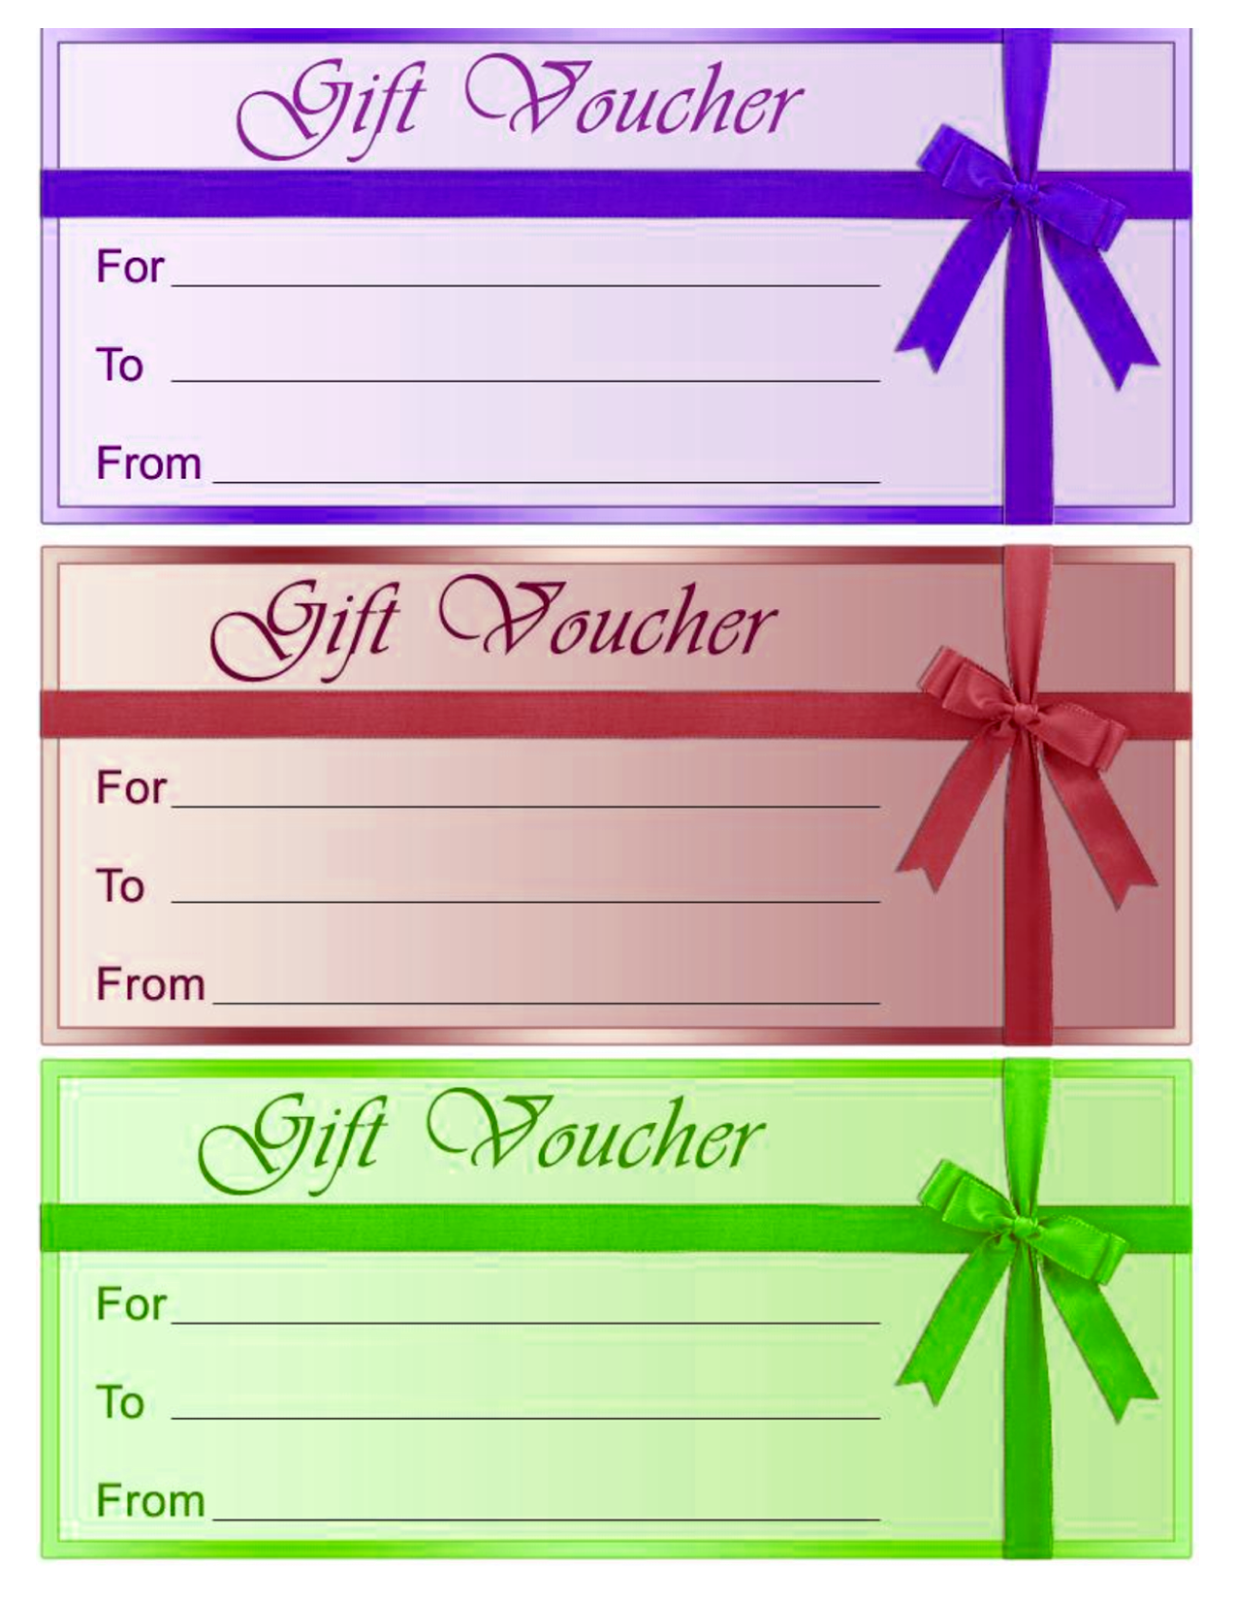 Gift Certificate Template Free Download Pdf